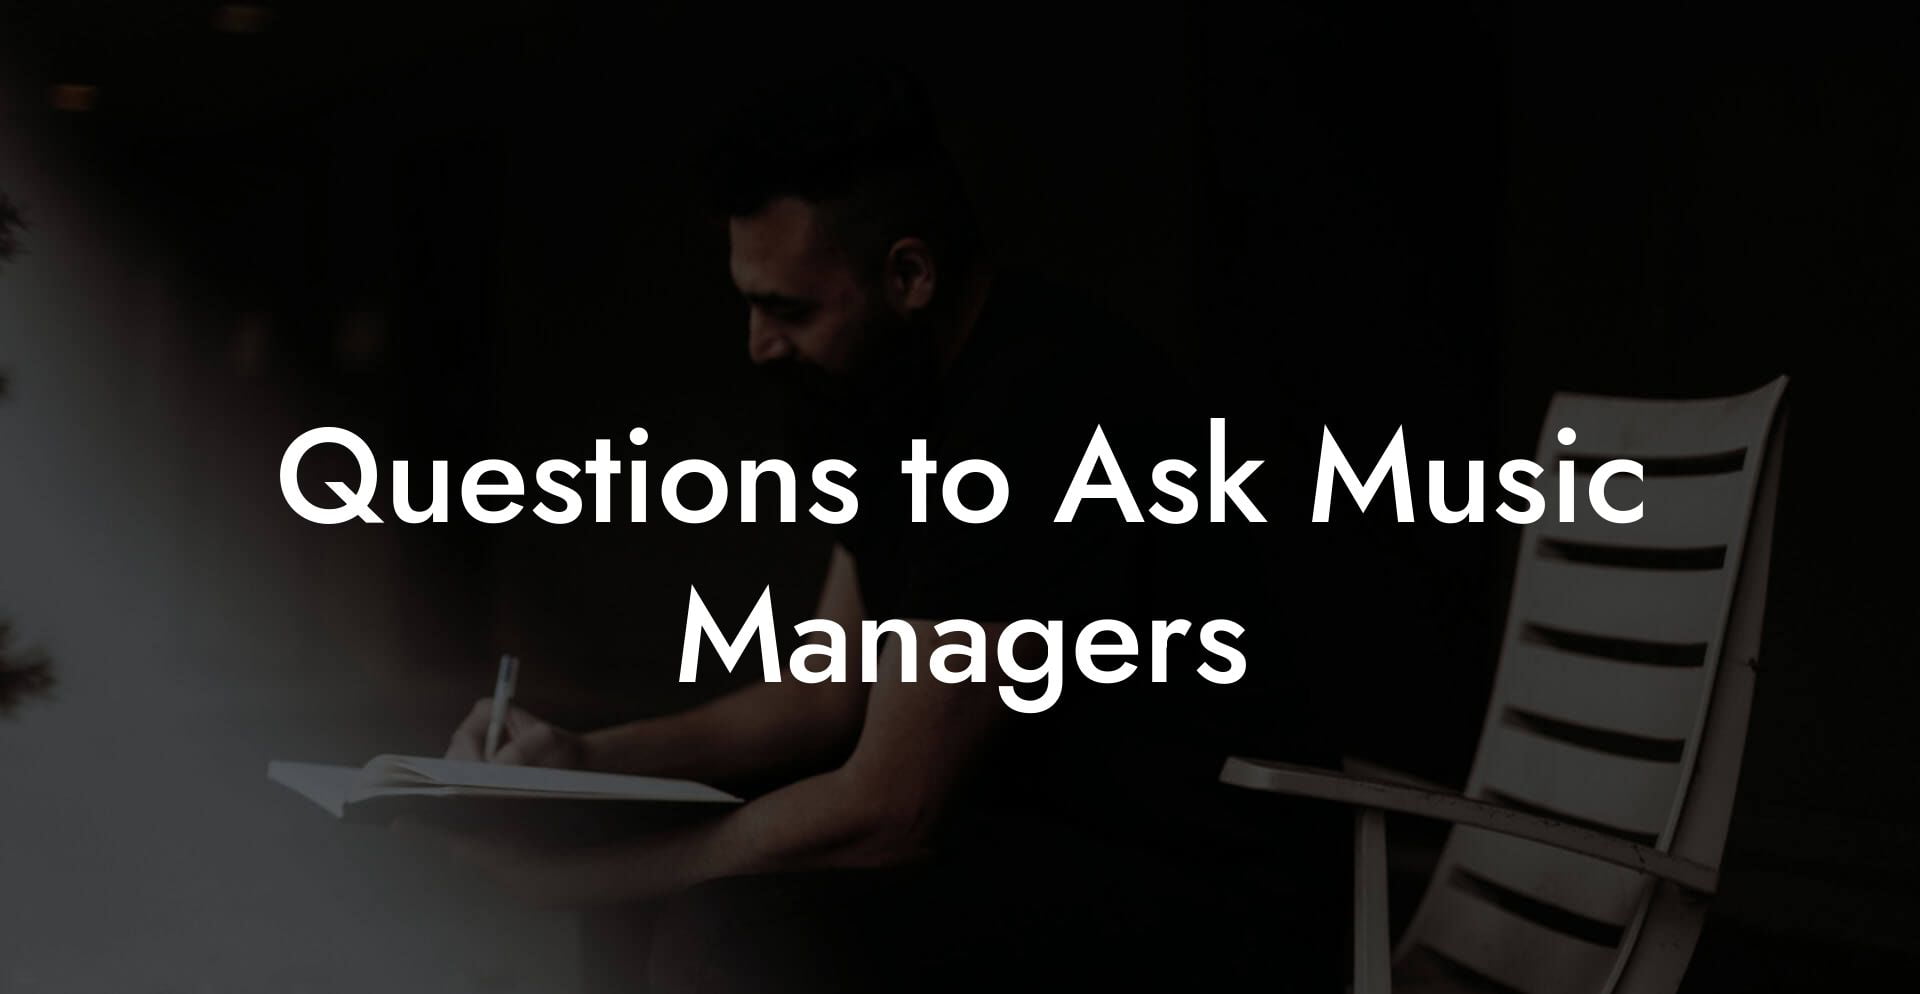 Questions to Ask Music Managers